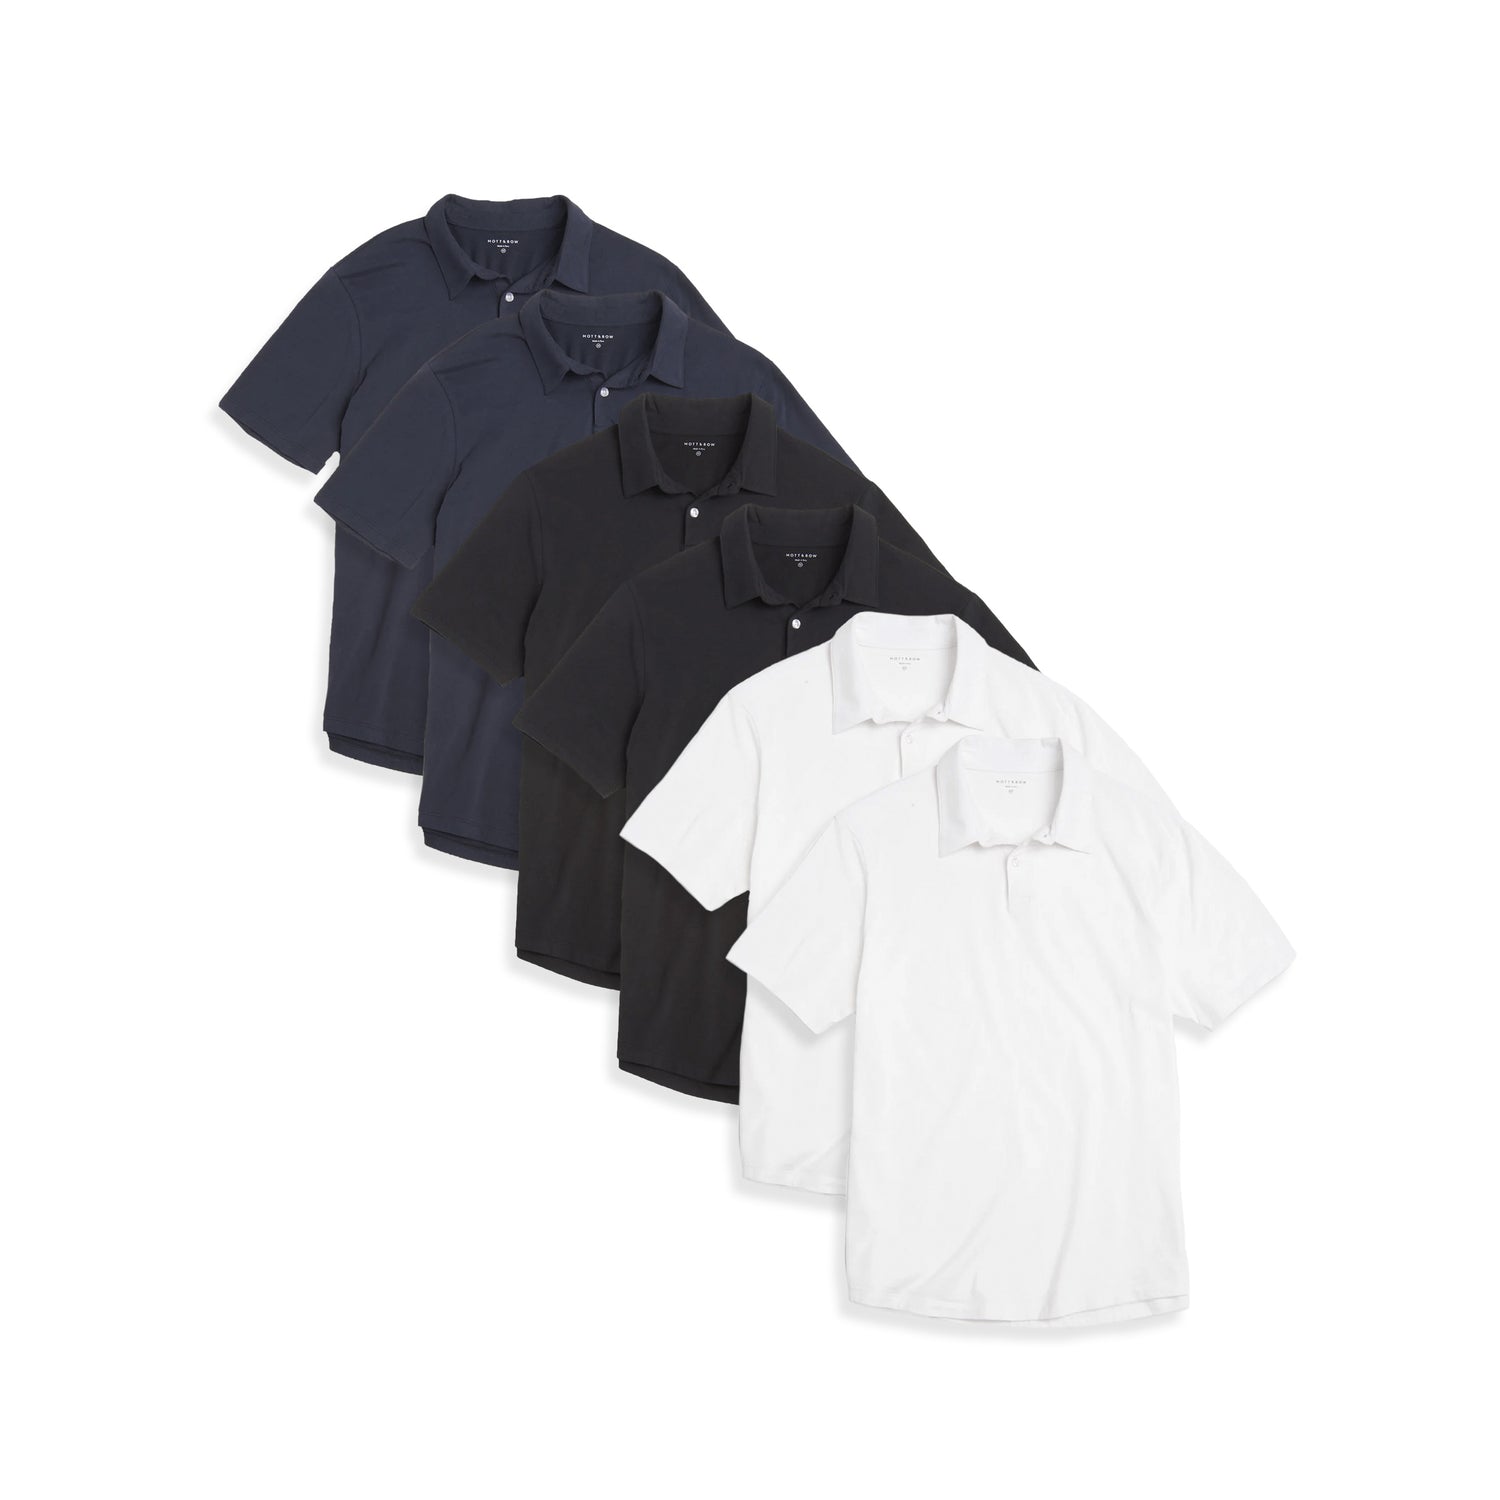 mens jersey polo 6 packs